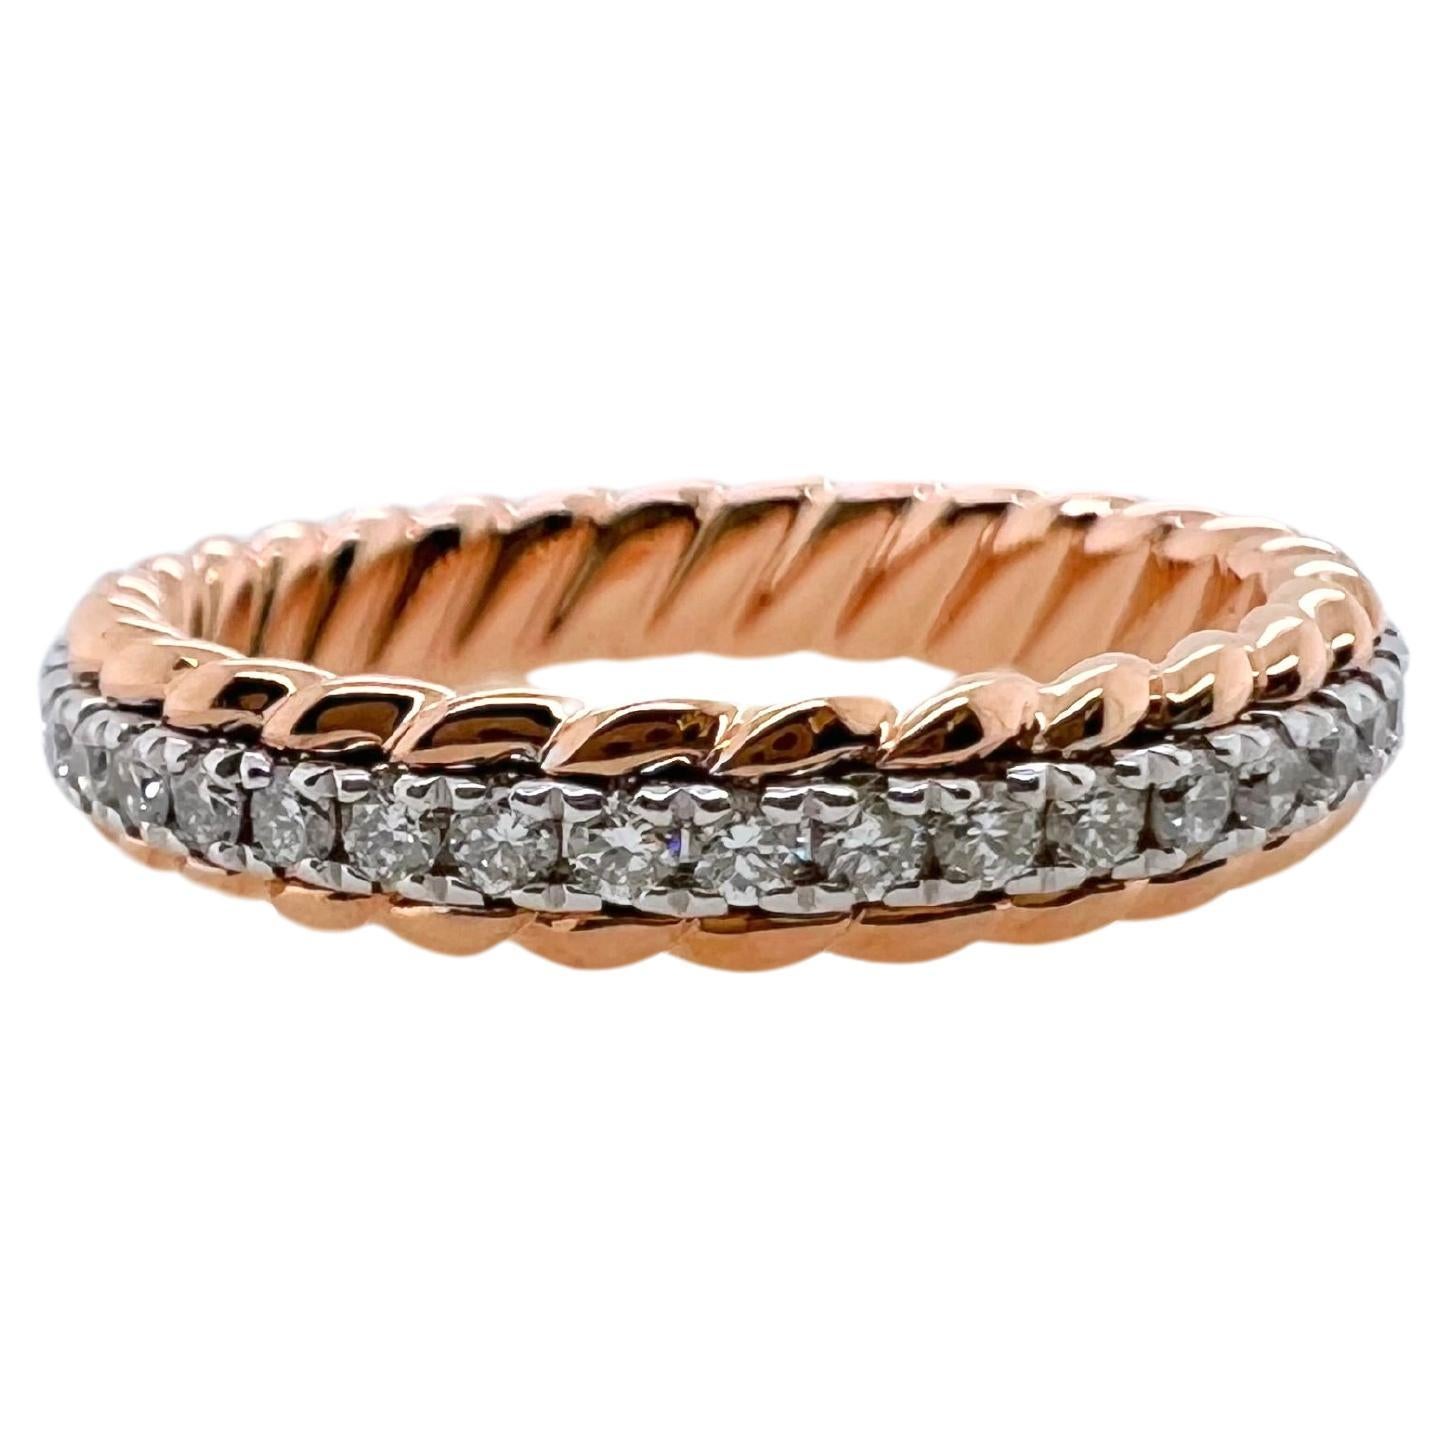 This amazing set of 3 bands will be your go to favorites.  The individual bands are made in 18k rose gold, yellow gold, and white gold with round brilliant diamonds prongs set.  The outer edges have a unique rope style trim that gives texture and